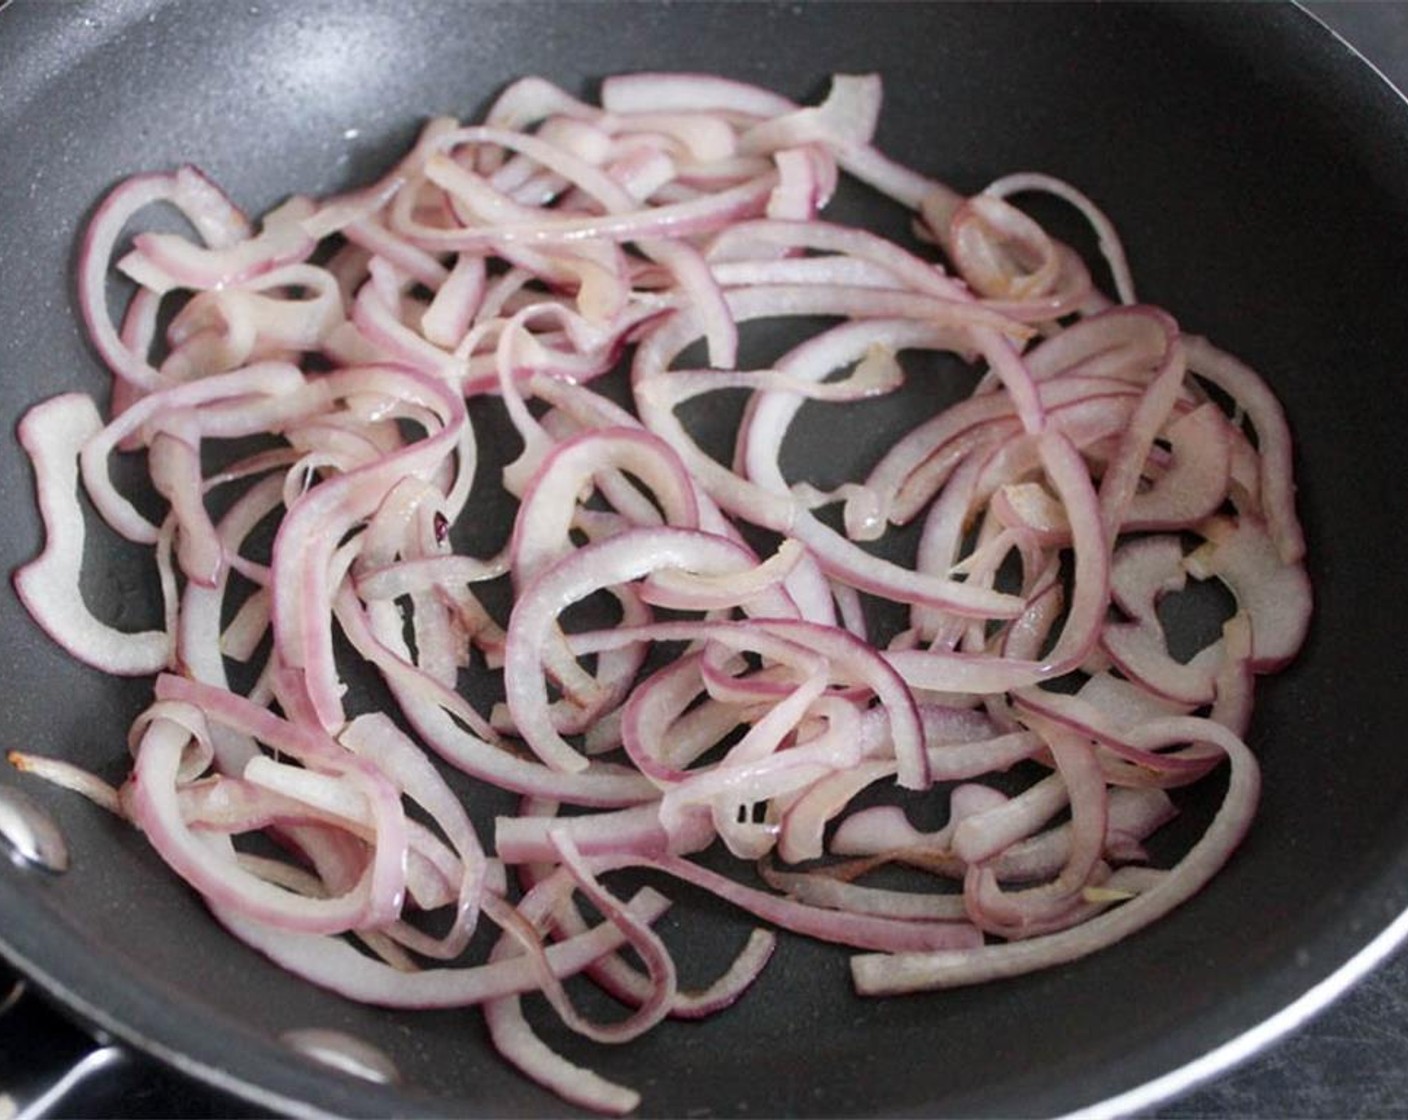 step 1 Heat 1 tsp of Oilve Oil in a small pan. When hot, add the Red Onion (1/2) and sauté for about 5 minutes until soft. Remove from the heat and set aside.